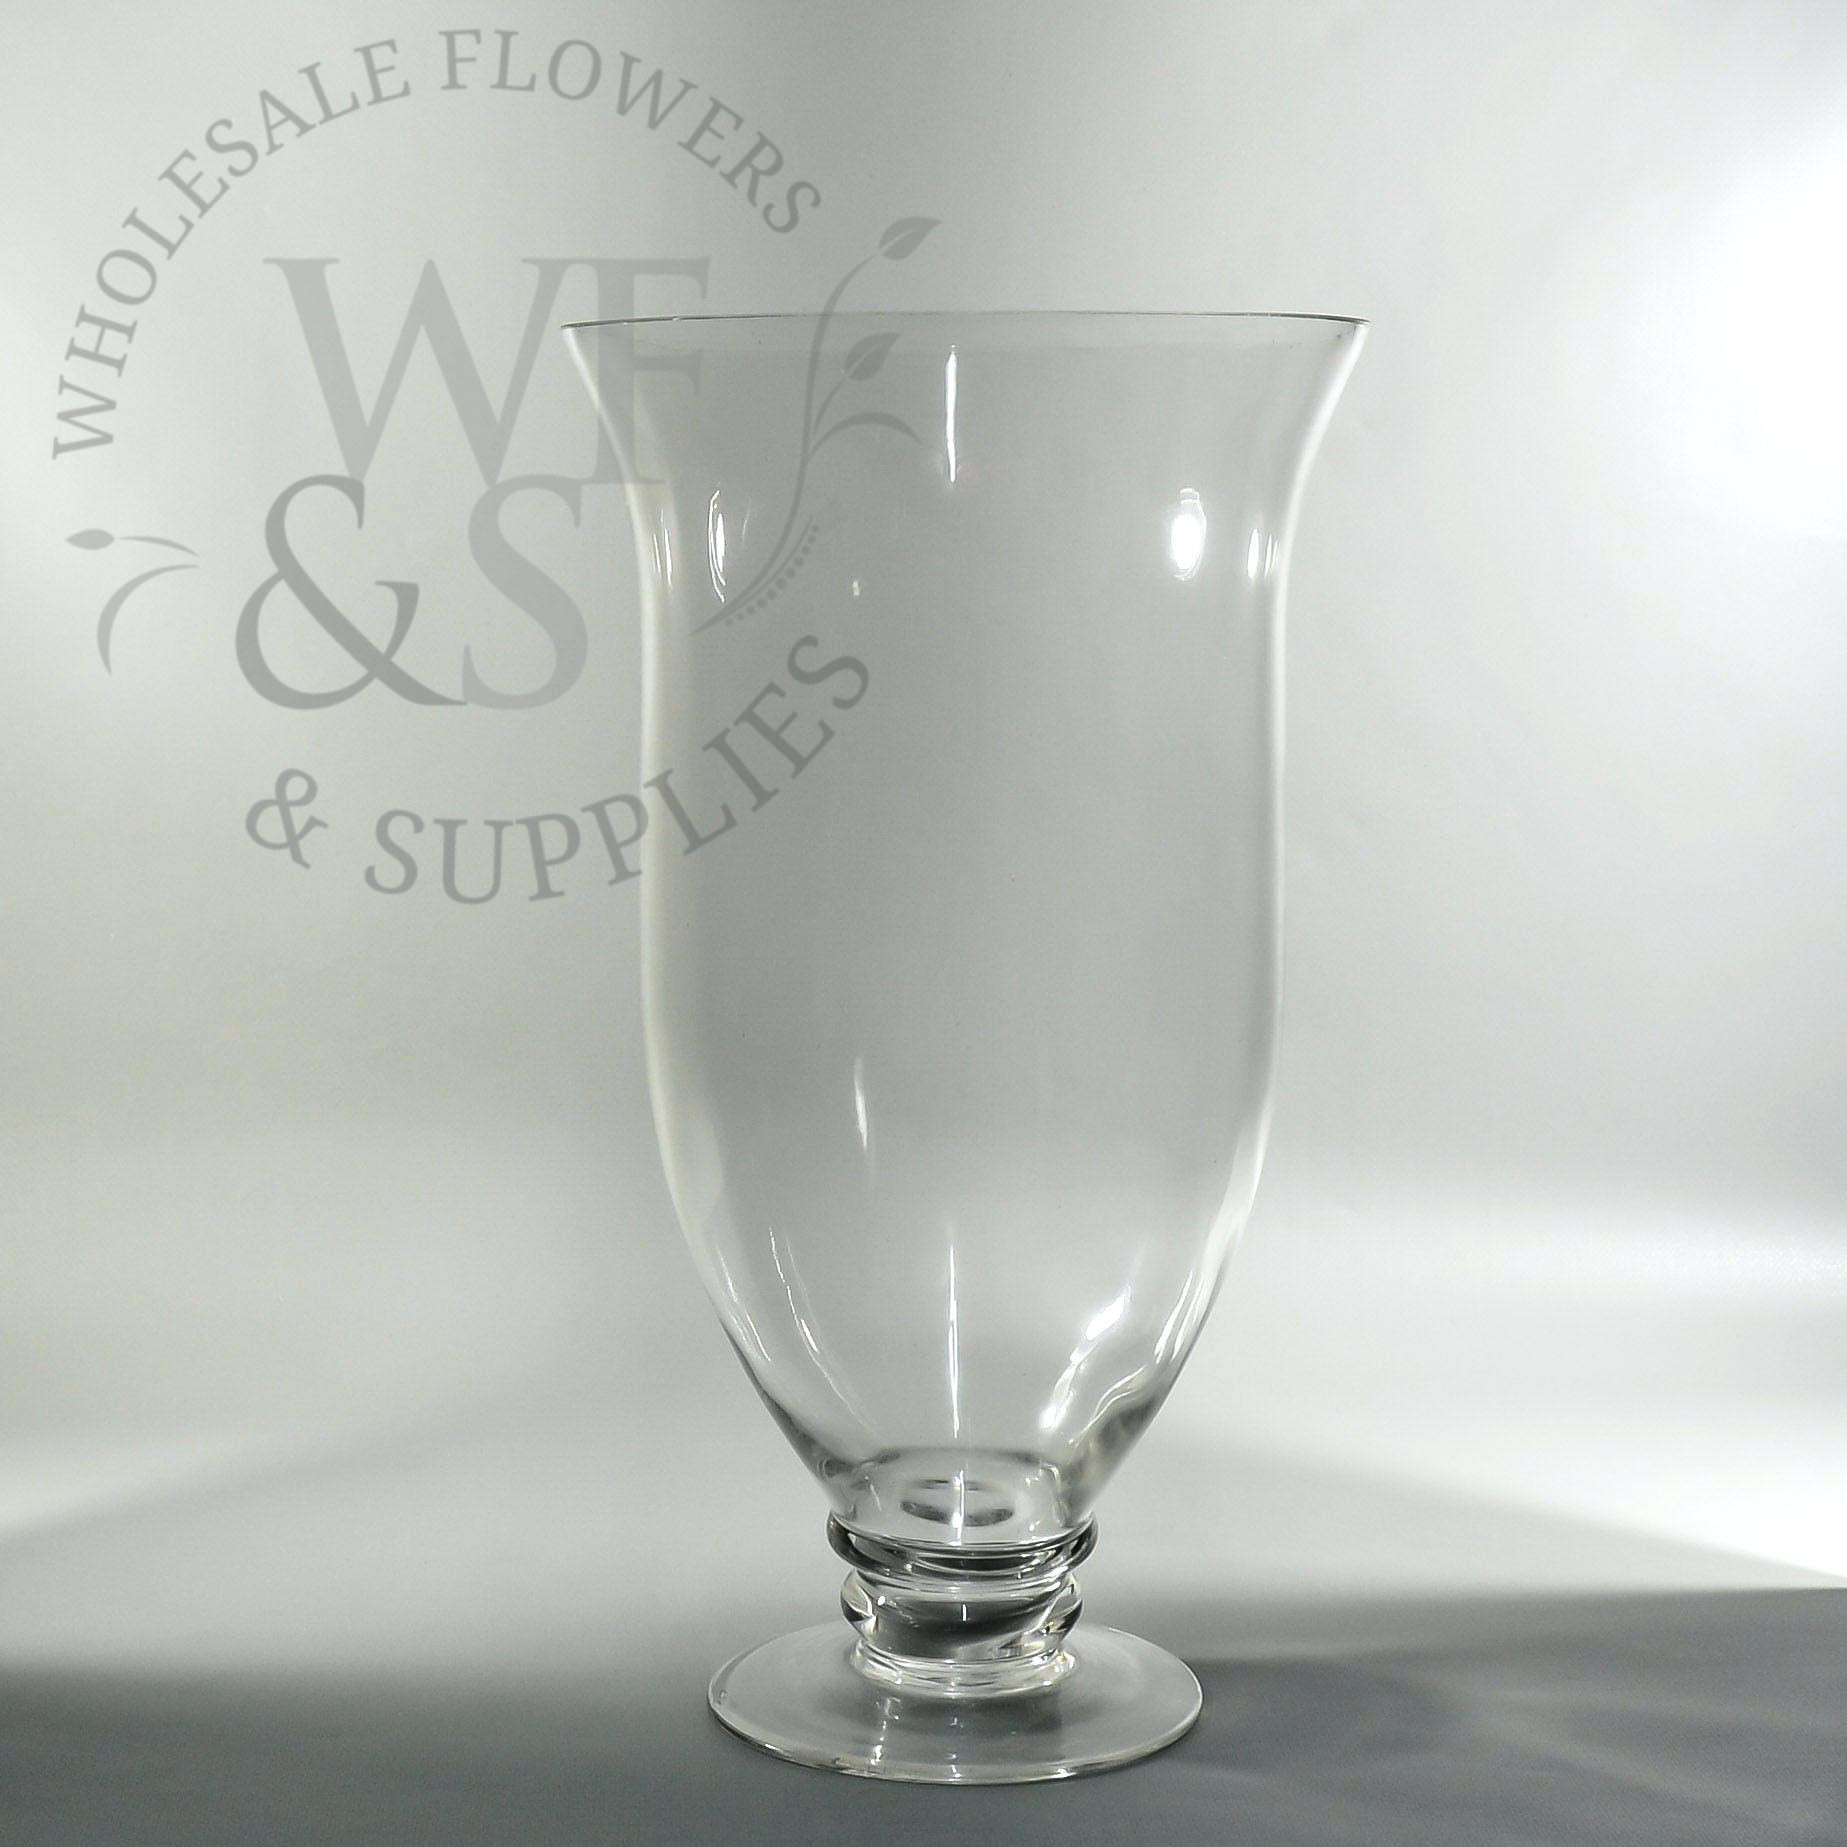 13 Fantastic Waterford Crystal Flower Vase 2024 free download waterford crystal flower vase of sunflower wedding invitations from cheap wedding centerpieces living for sunflower wedding invitations from cheap wedding centerpieces living room waterford 